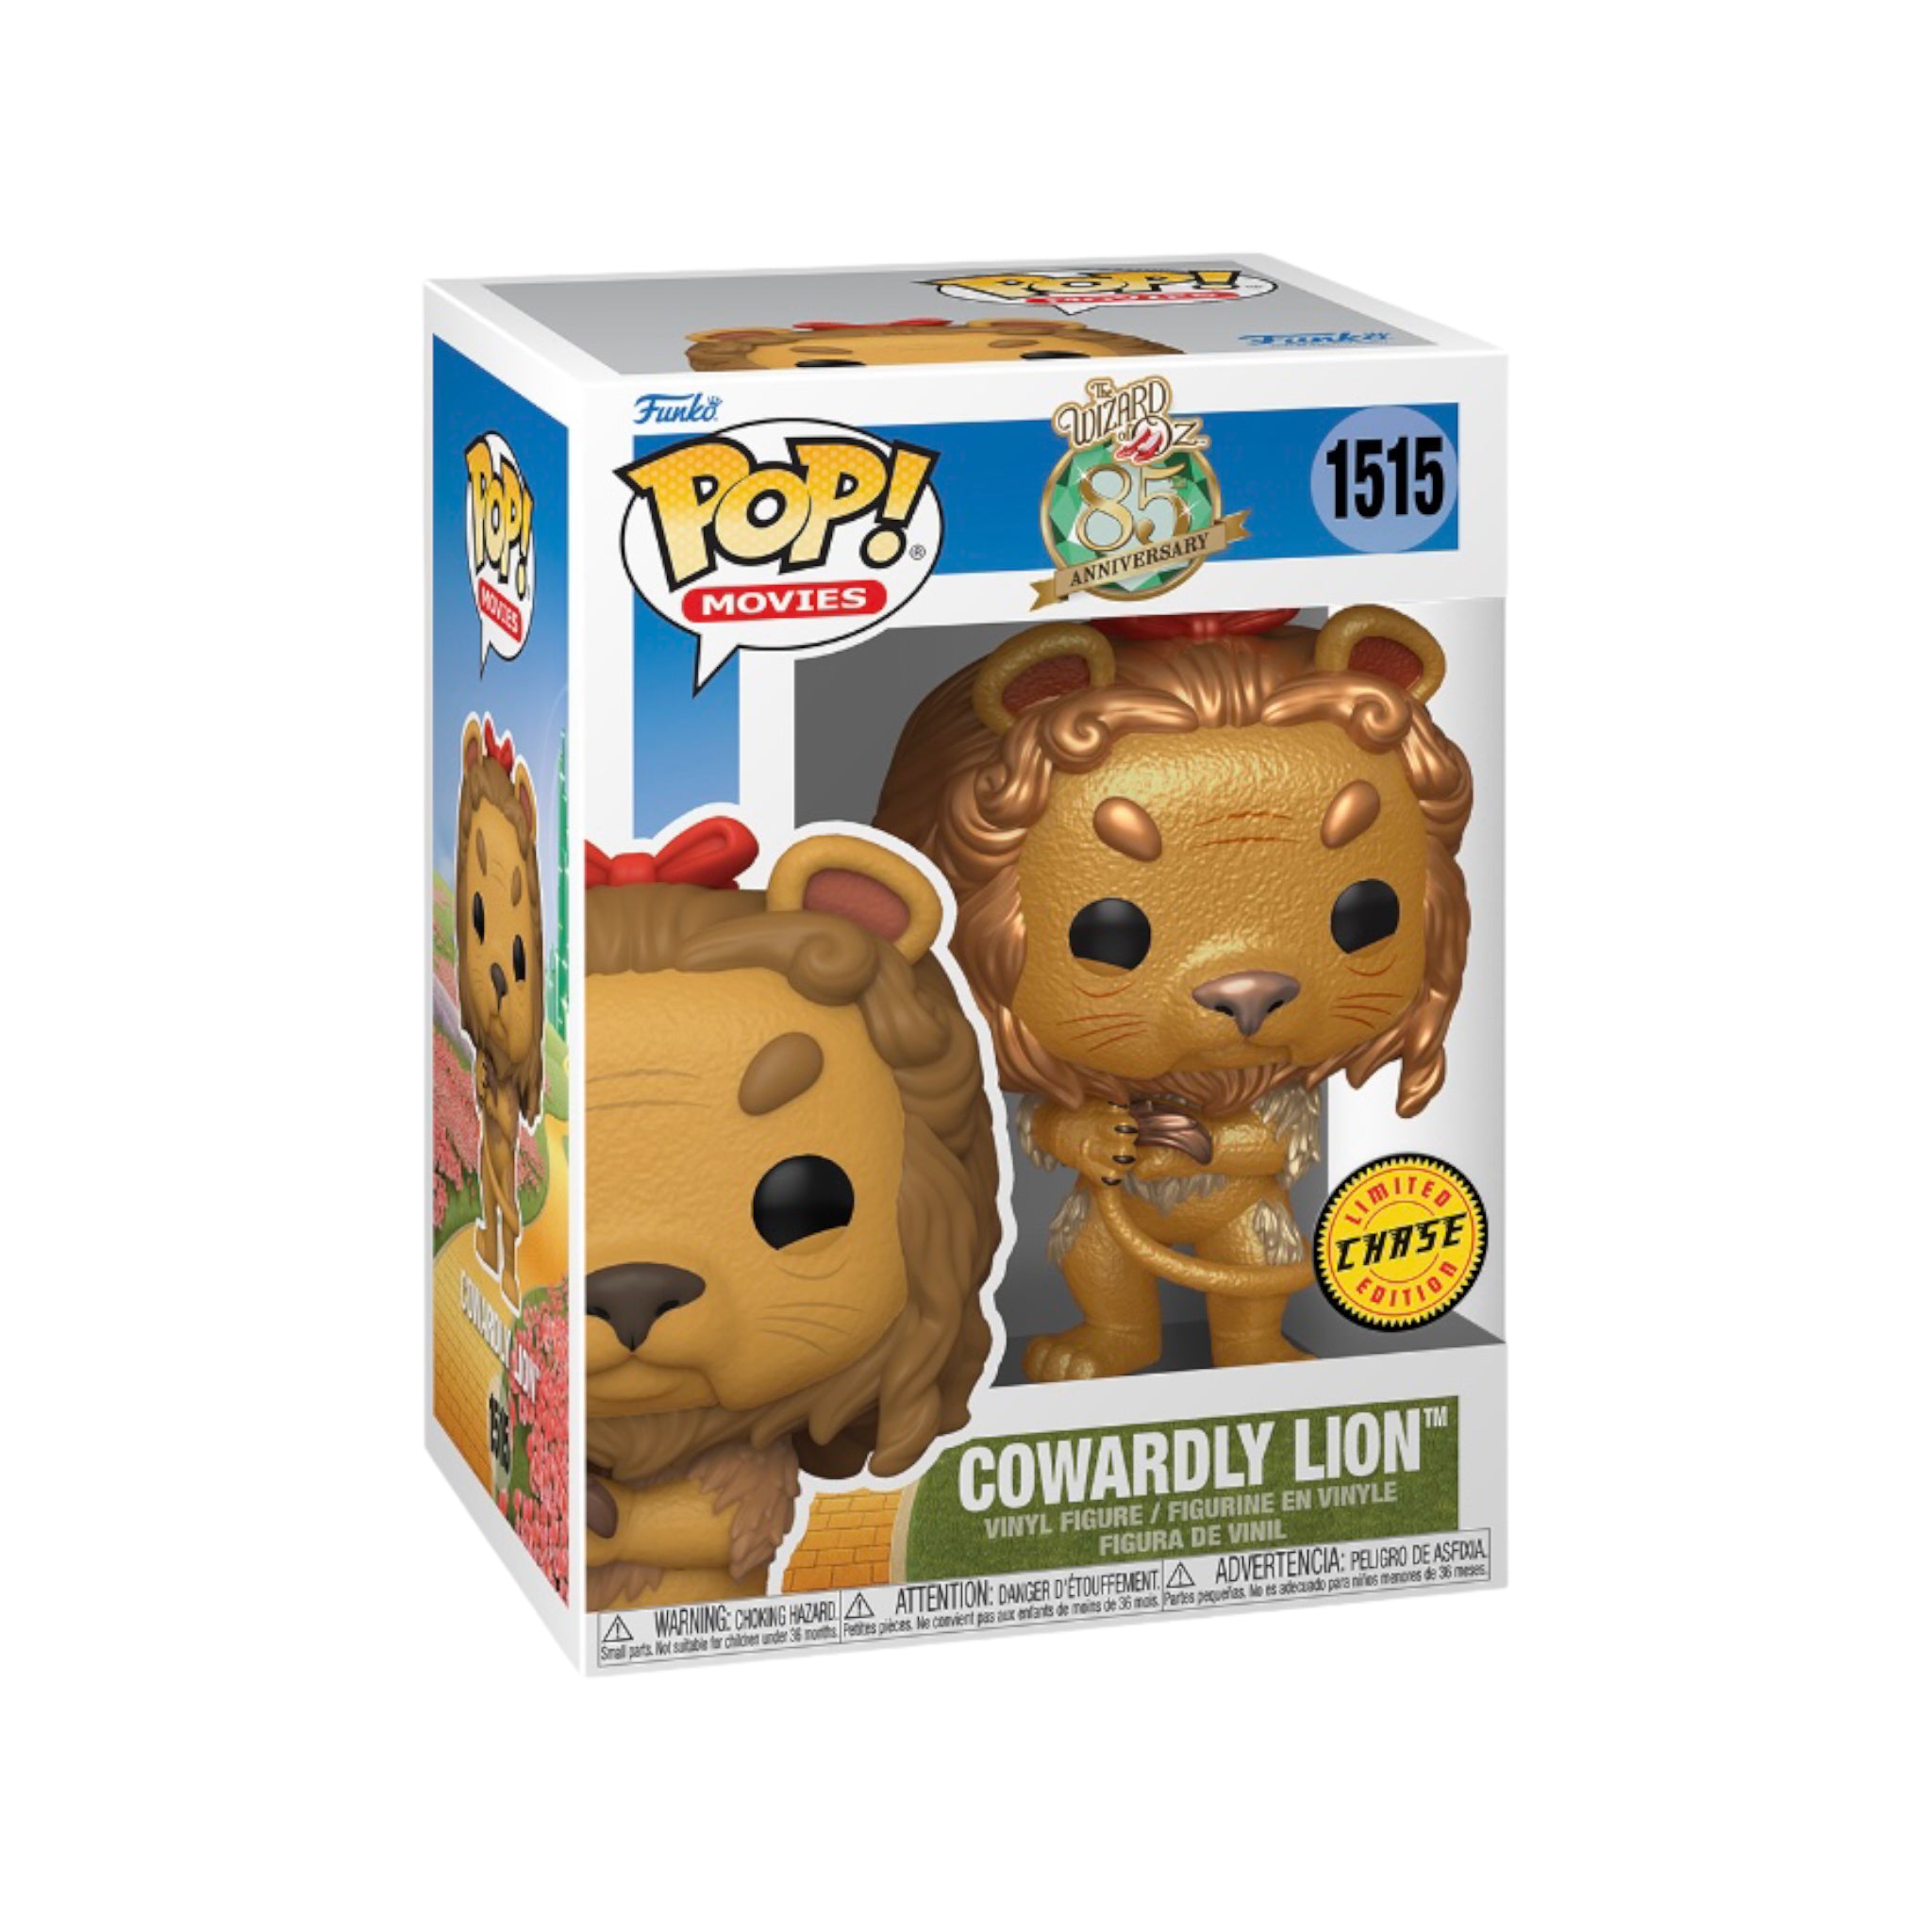 Cowardly Lion #1515 (Metallic Chase) Funko Pop! - The Wizard of Oz - Condition 8.5/10